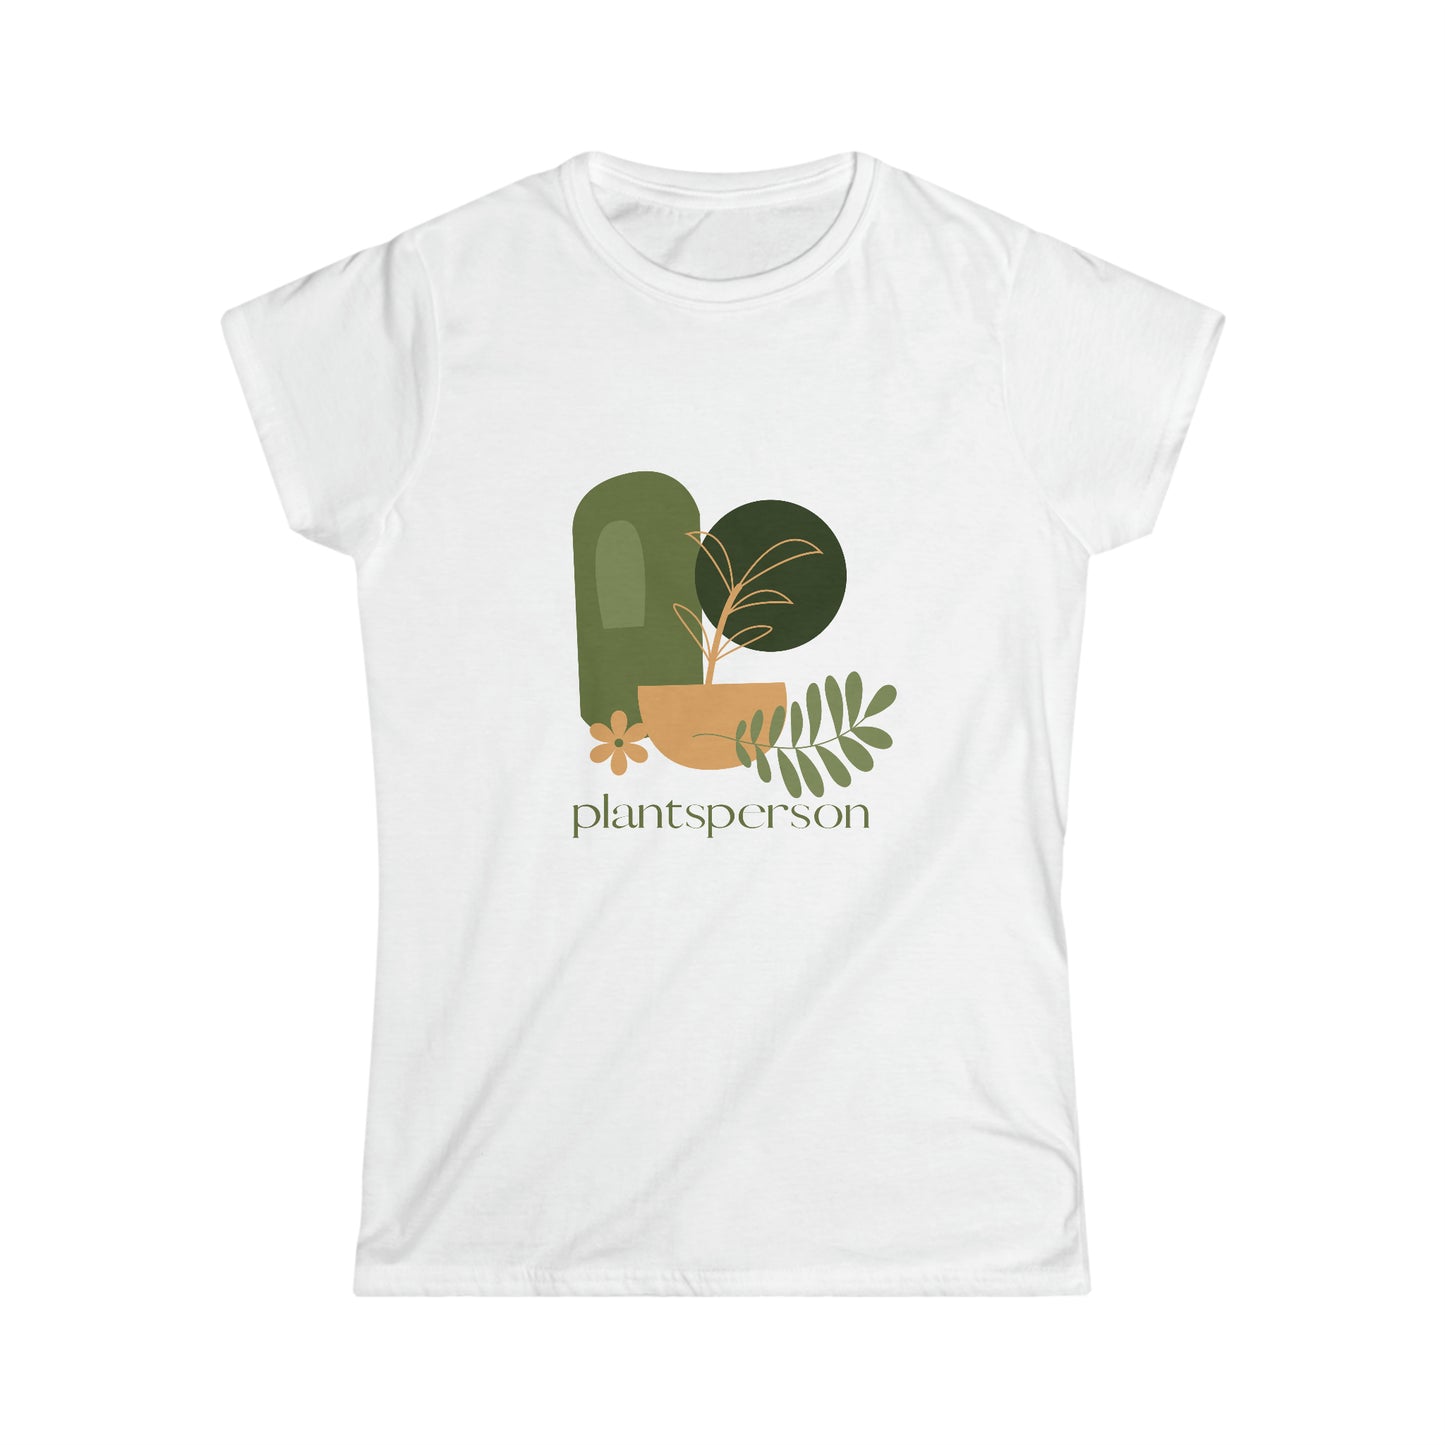 Plantsperson Fun Gardening Fitted T-Shirt for Plant Lovers